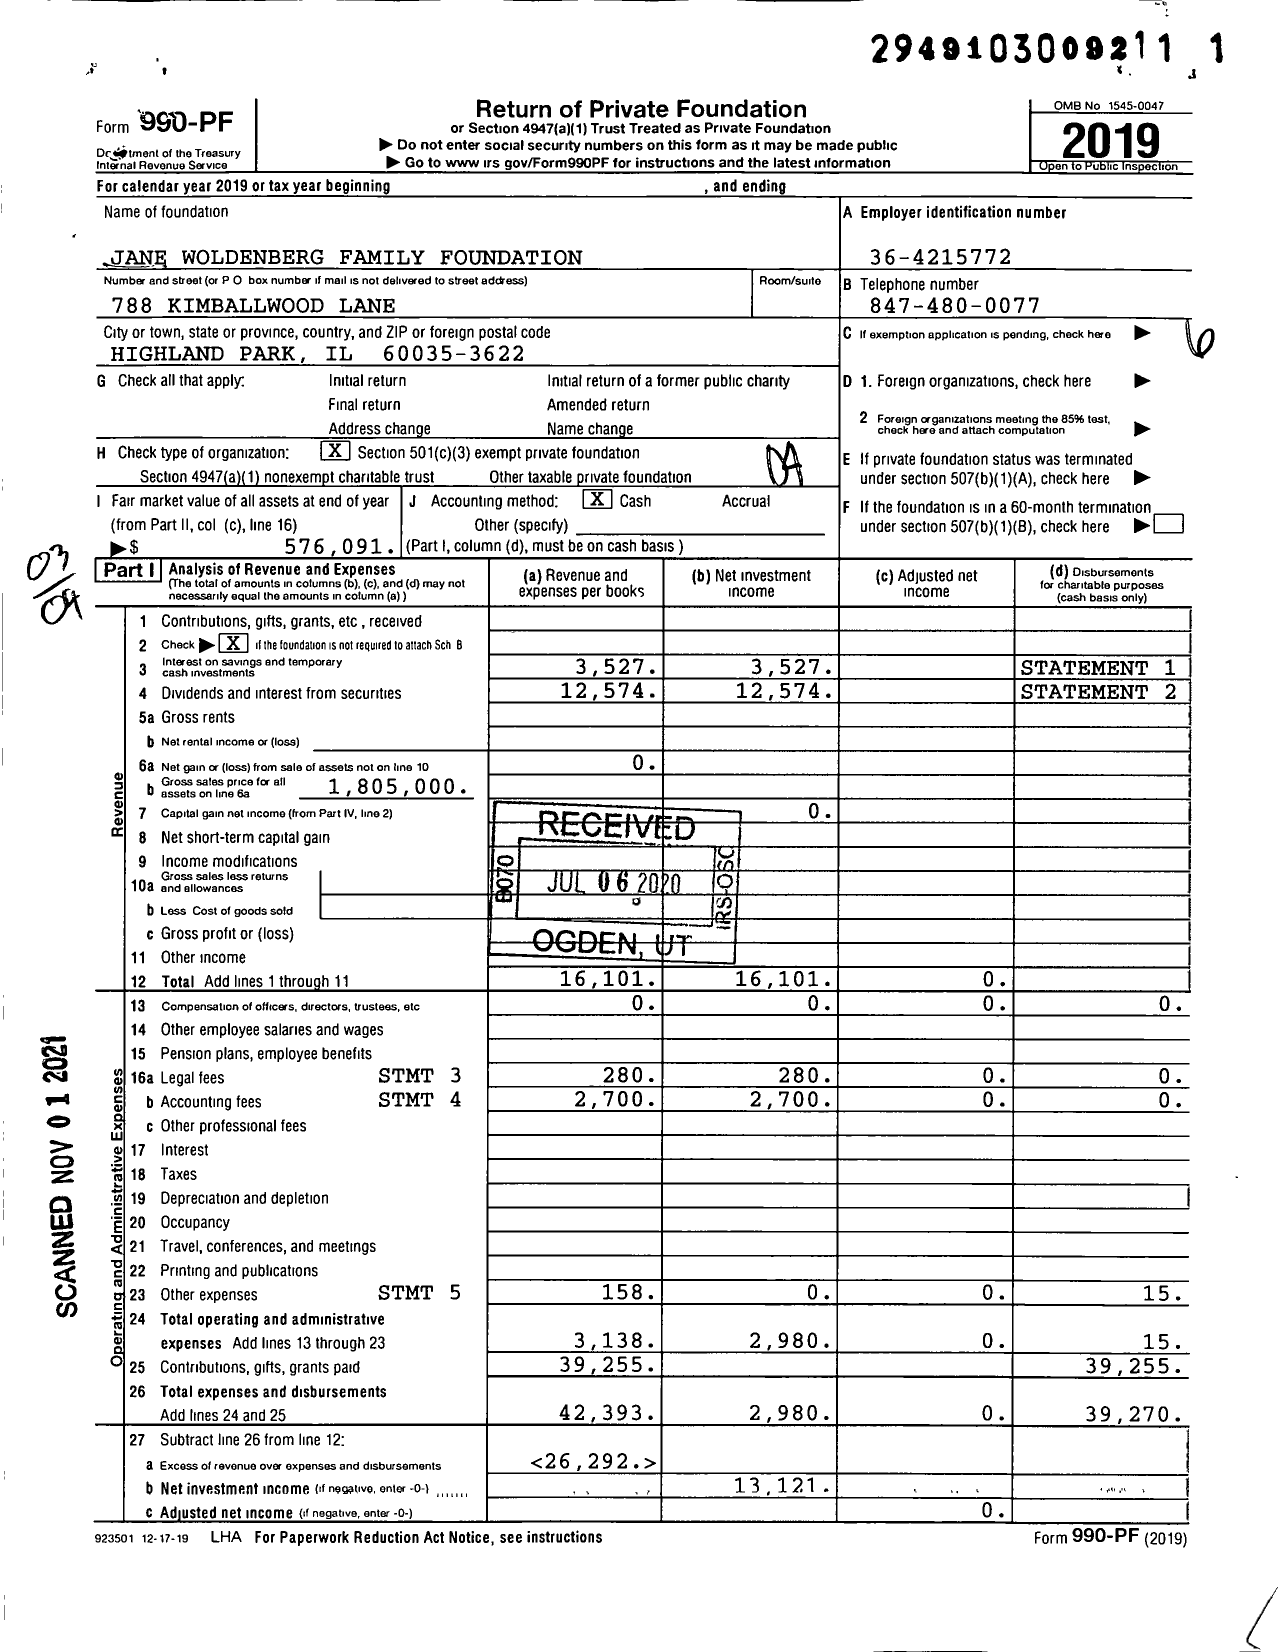 Image of first page of 2019 Form 990PF for Jane Woldenberg Family Foundation